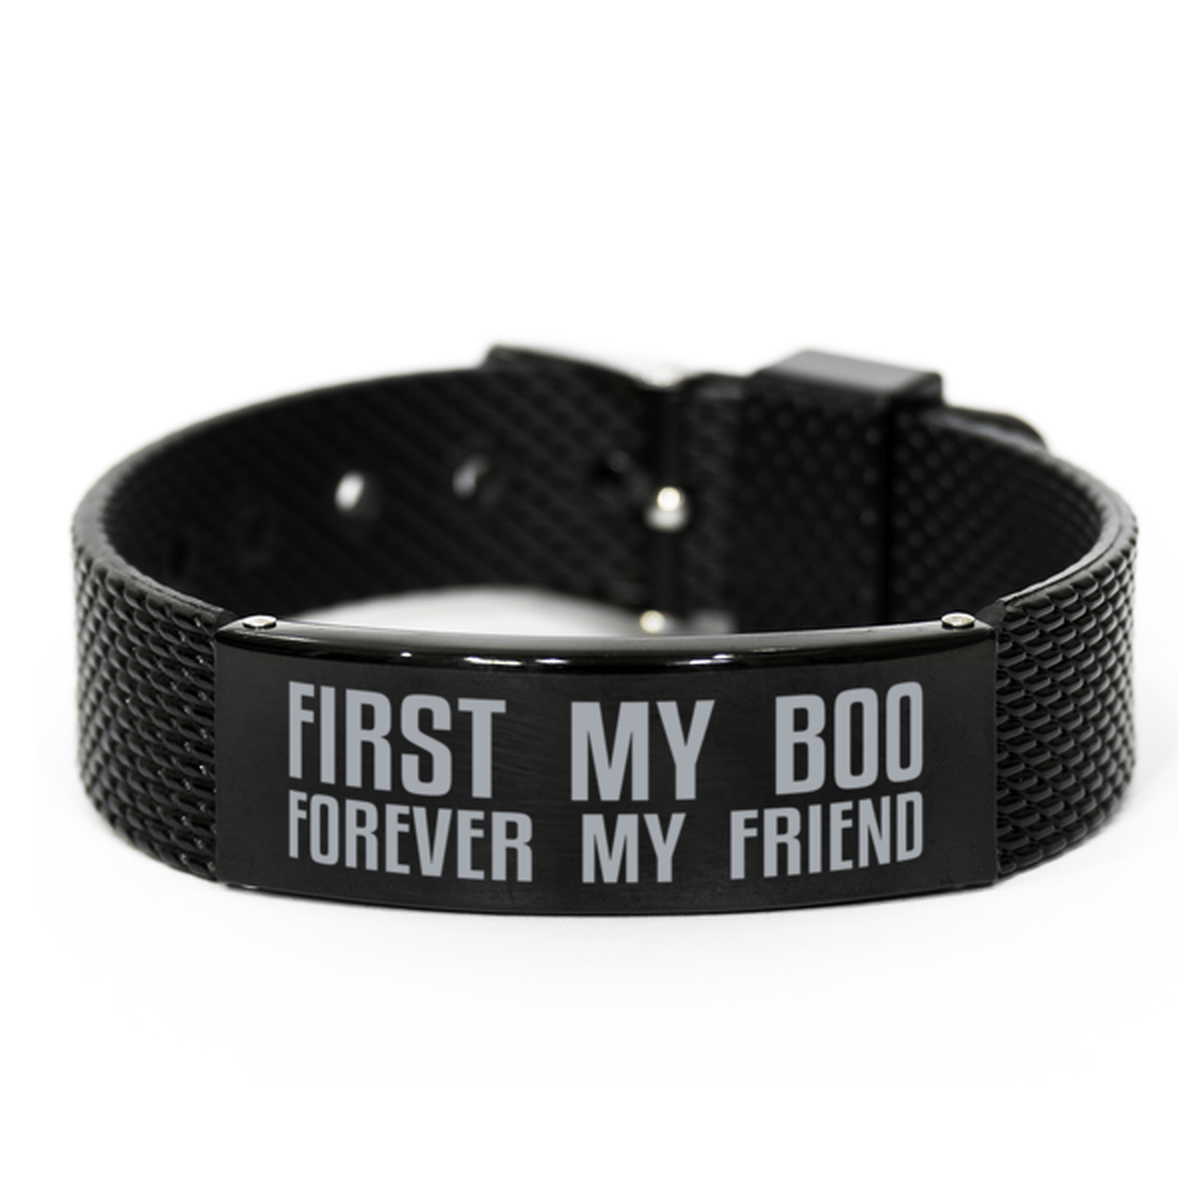 Unique Boo Black Shark Mesh Bracelet, First My Boo Forever My Friend, Best Gift for Boo Anniversary, Birthday, Christmas